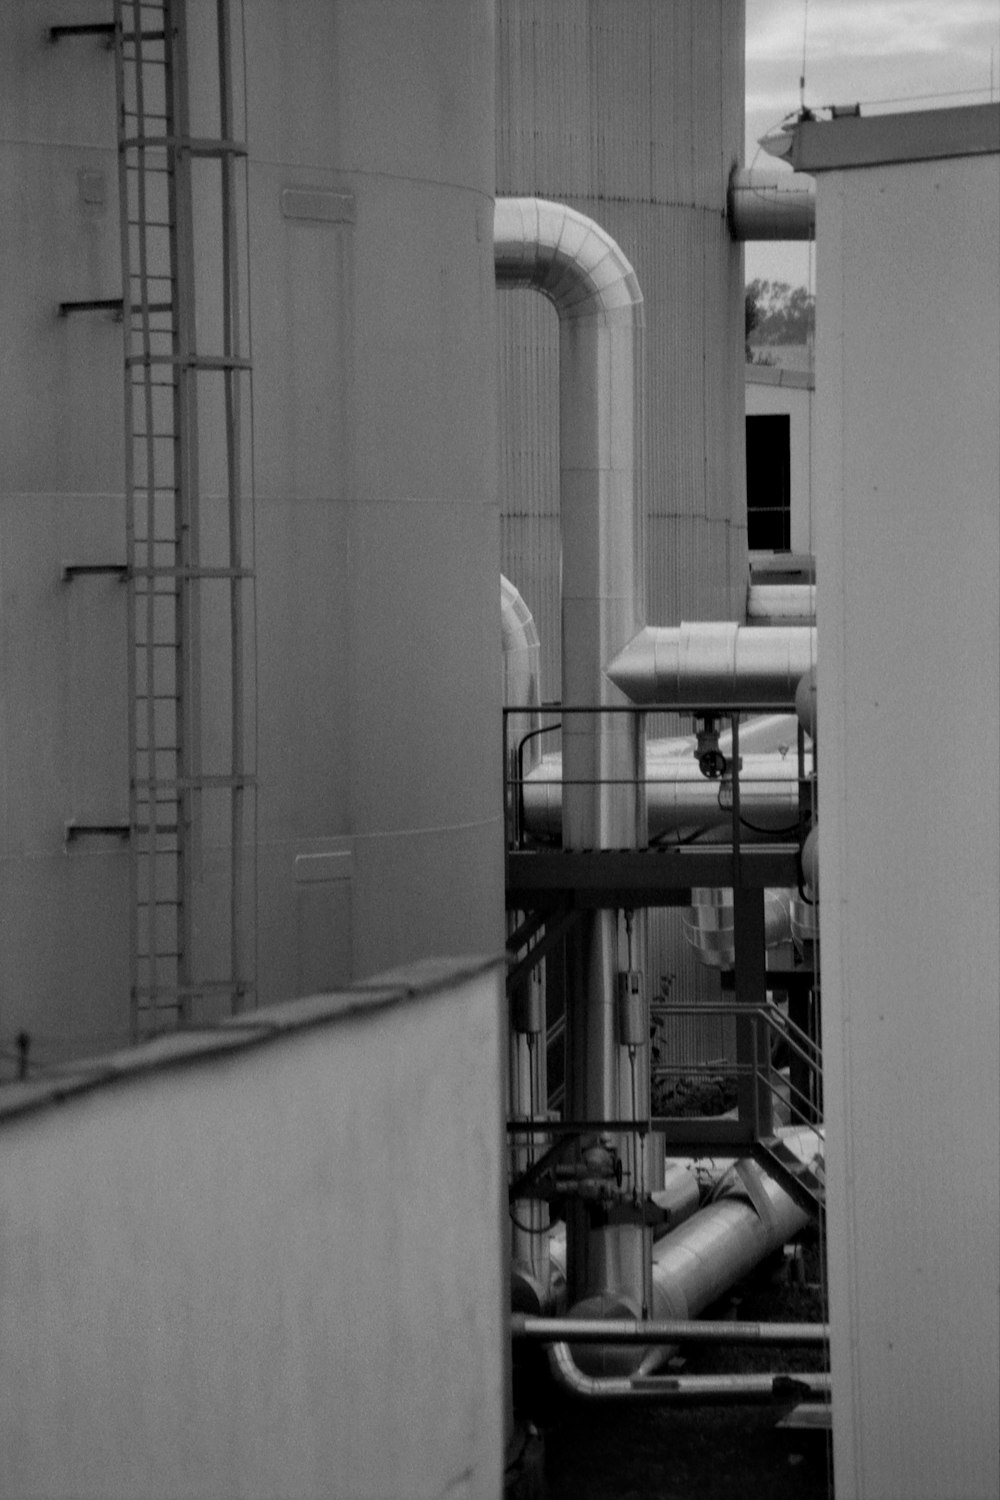 a black and white photo of pipes and pipes